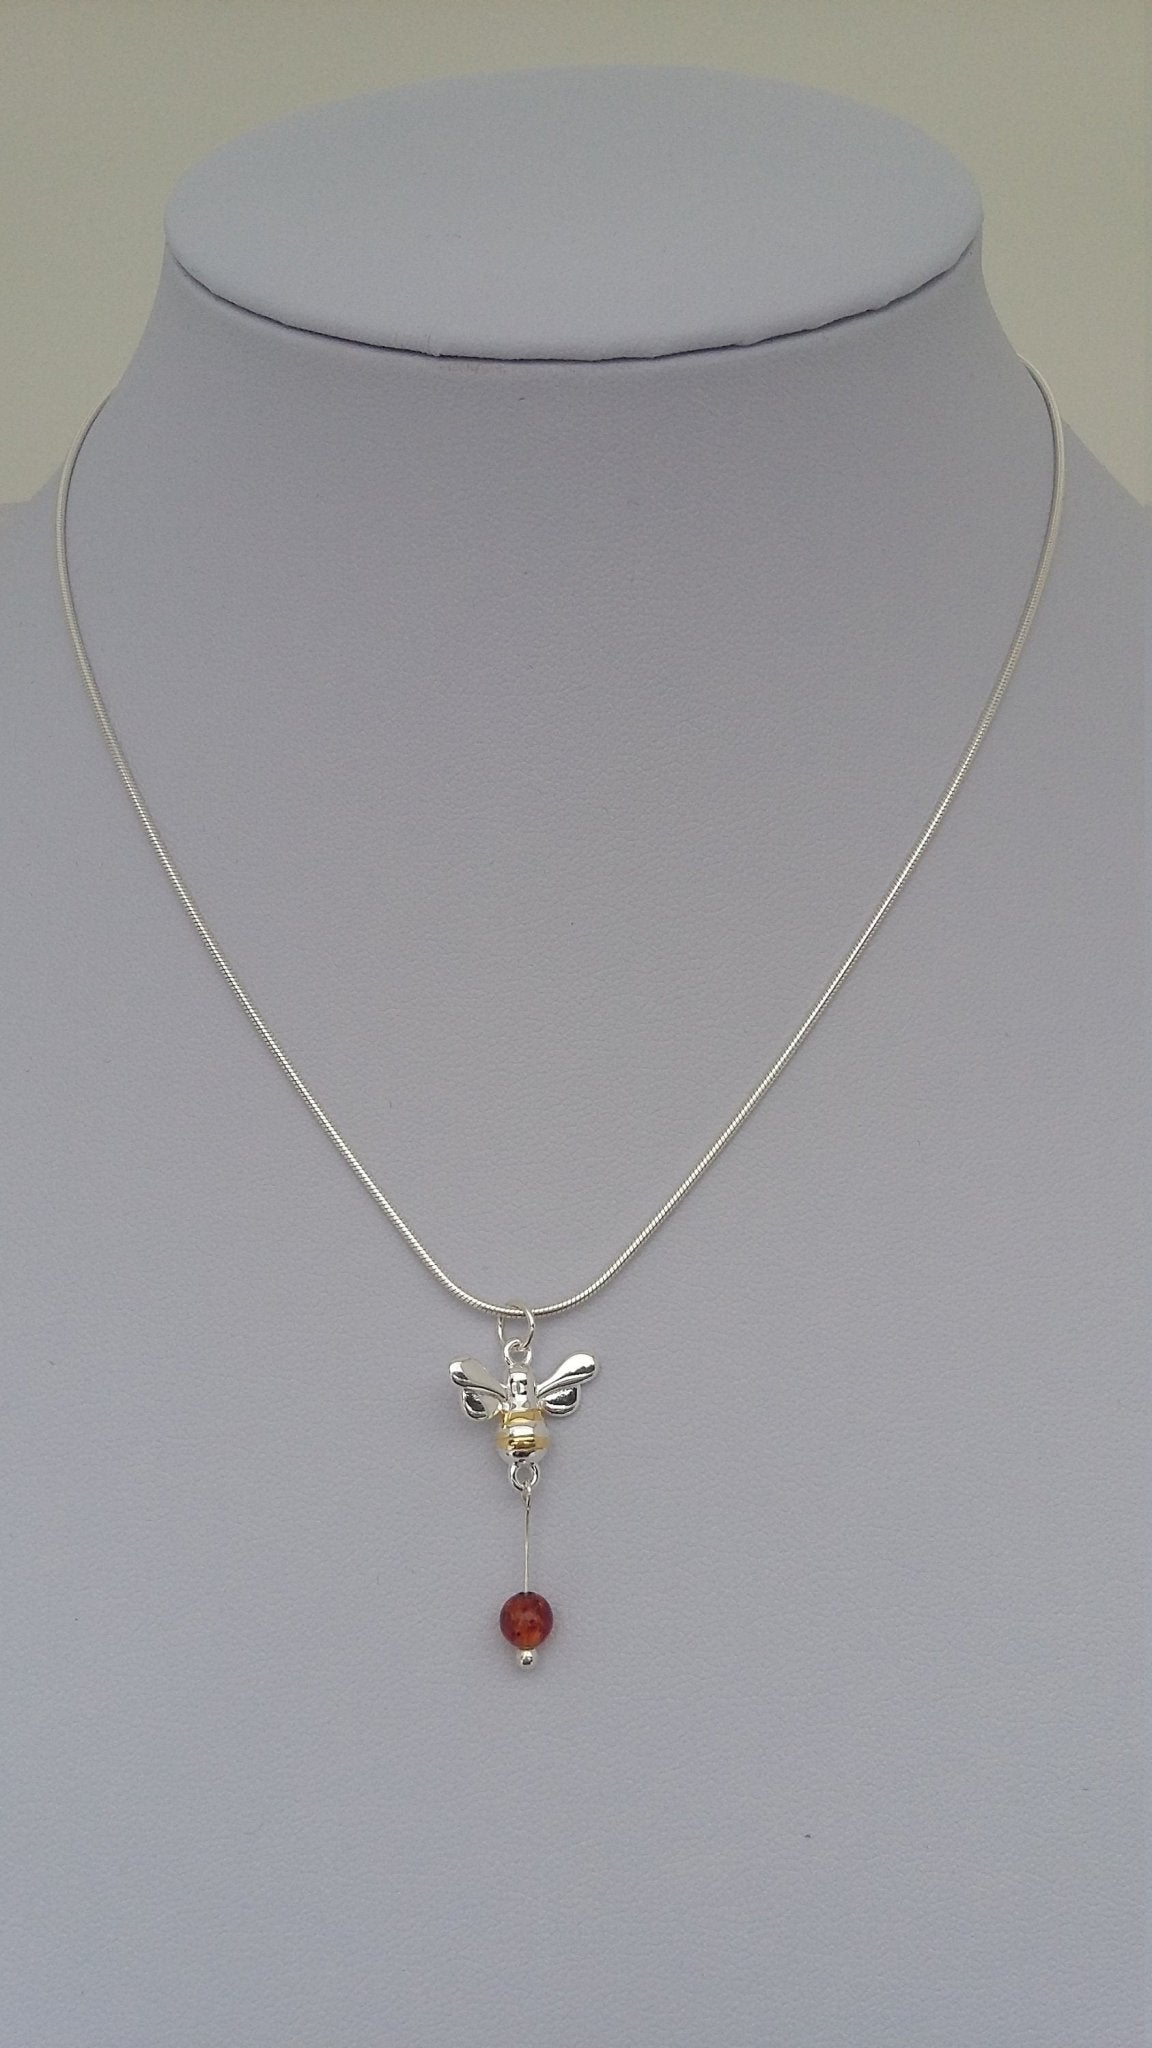 925 Sterling Silver Bumble Bee & Baltic Amber Necklace. - JOANNE MASSEY ARTISAN JEWELLERY